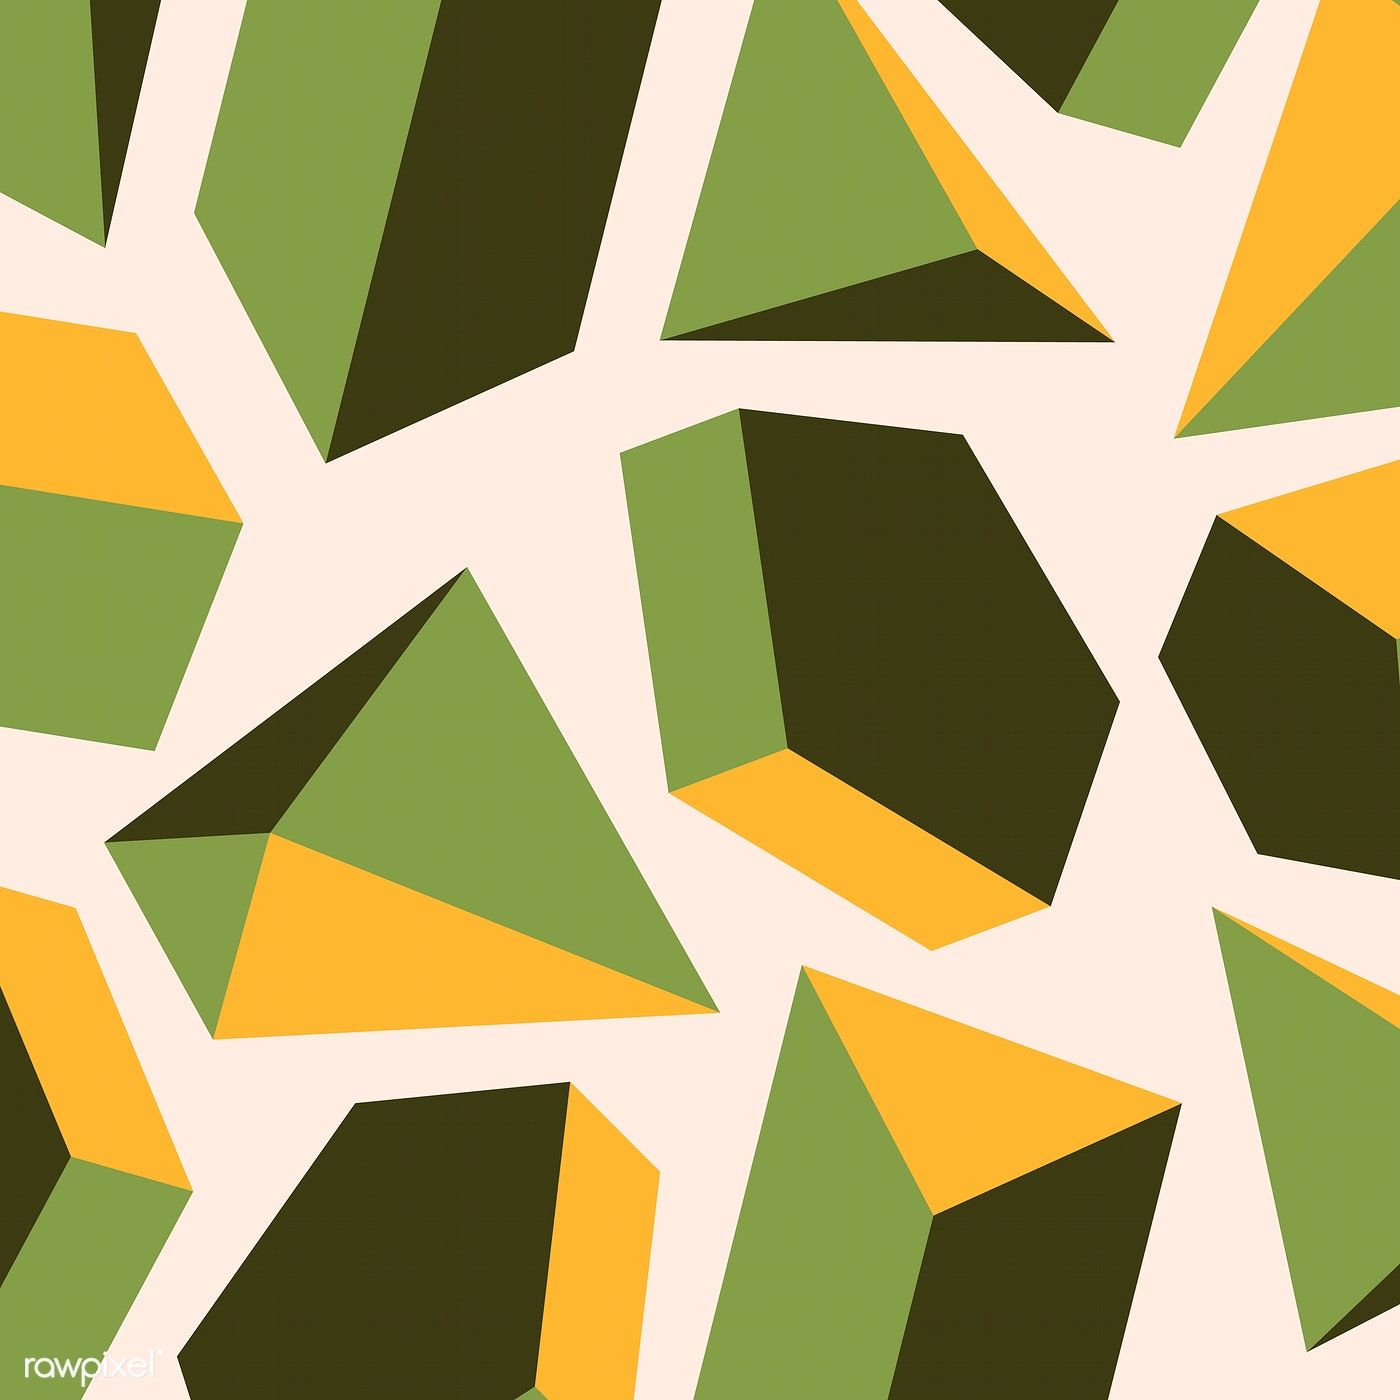 Yellow Lime Shape 3D Green Wallpapers